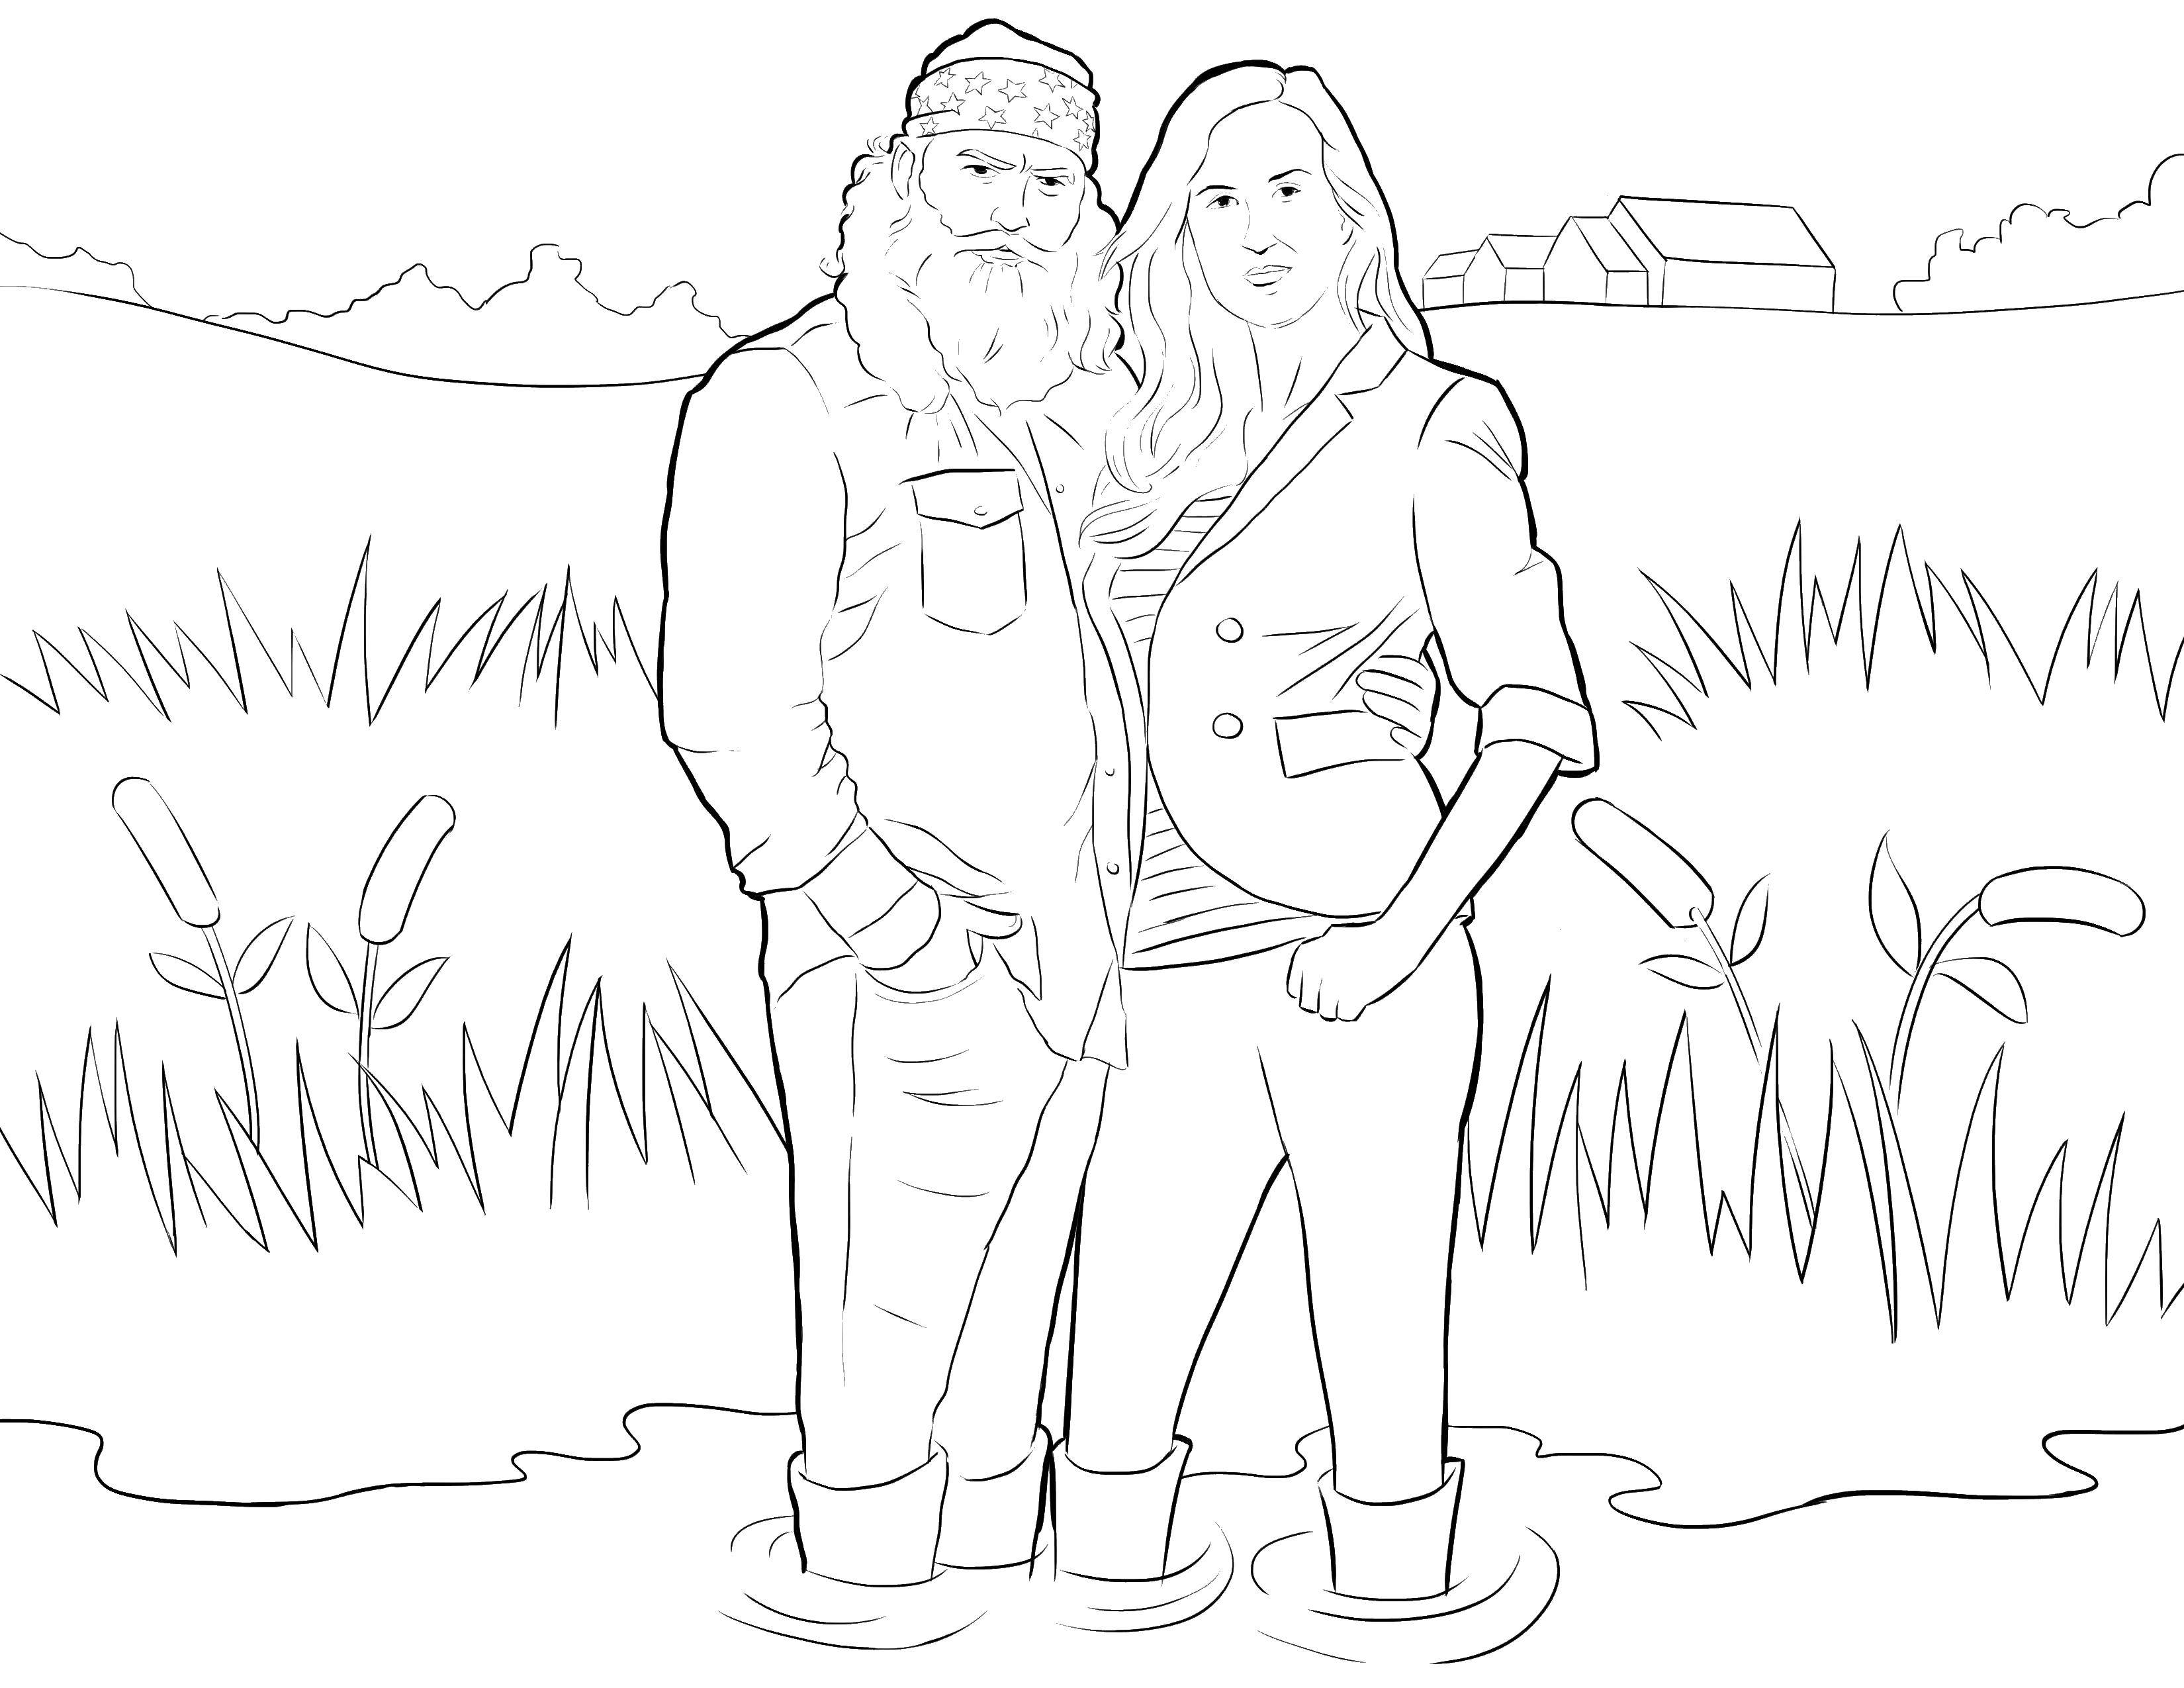 Coloring The girl with the guy in the water. Category People. Tags:  people, lake, swamp.